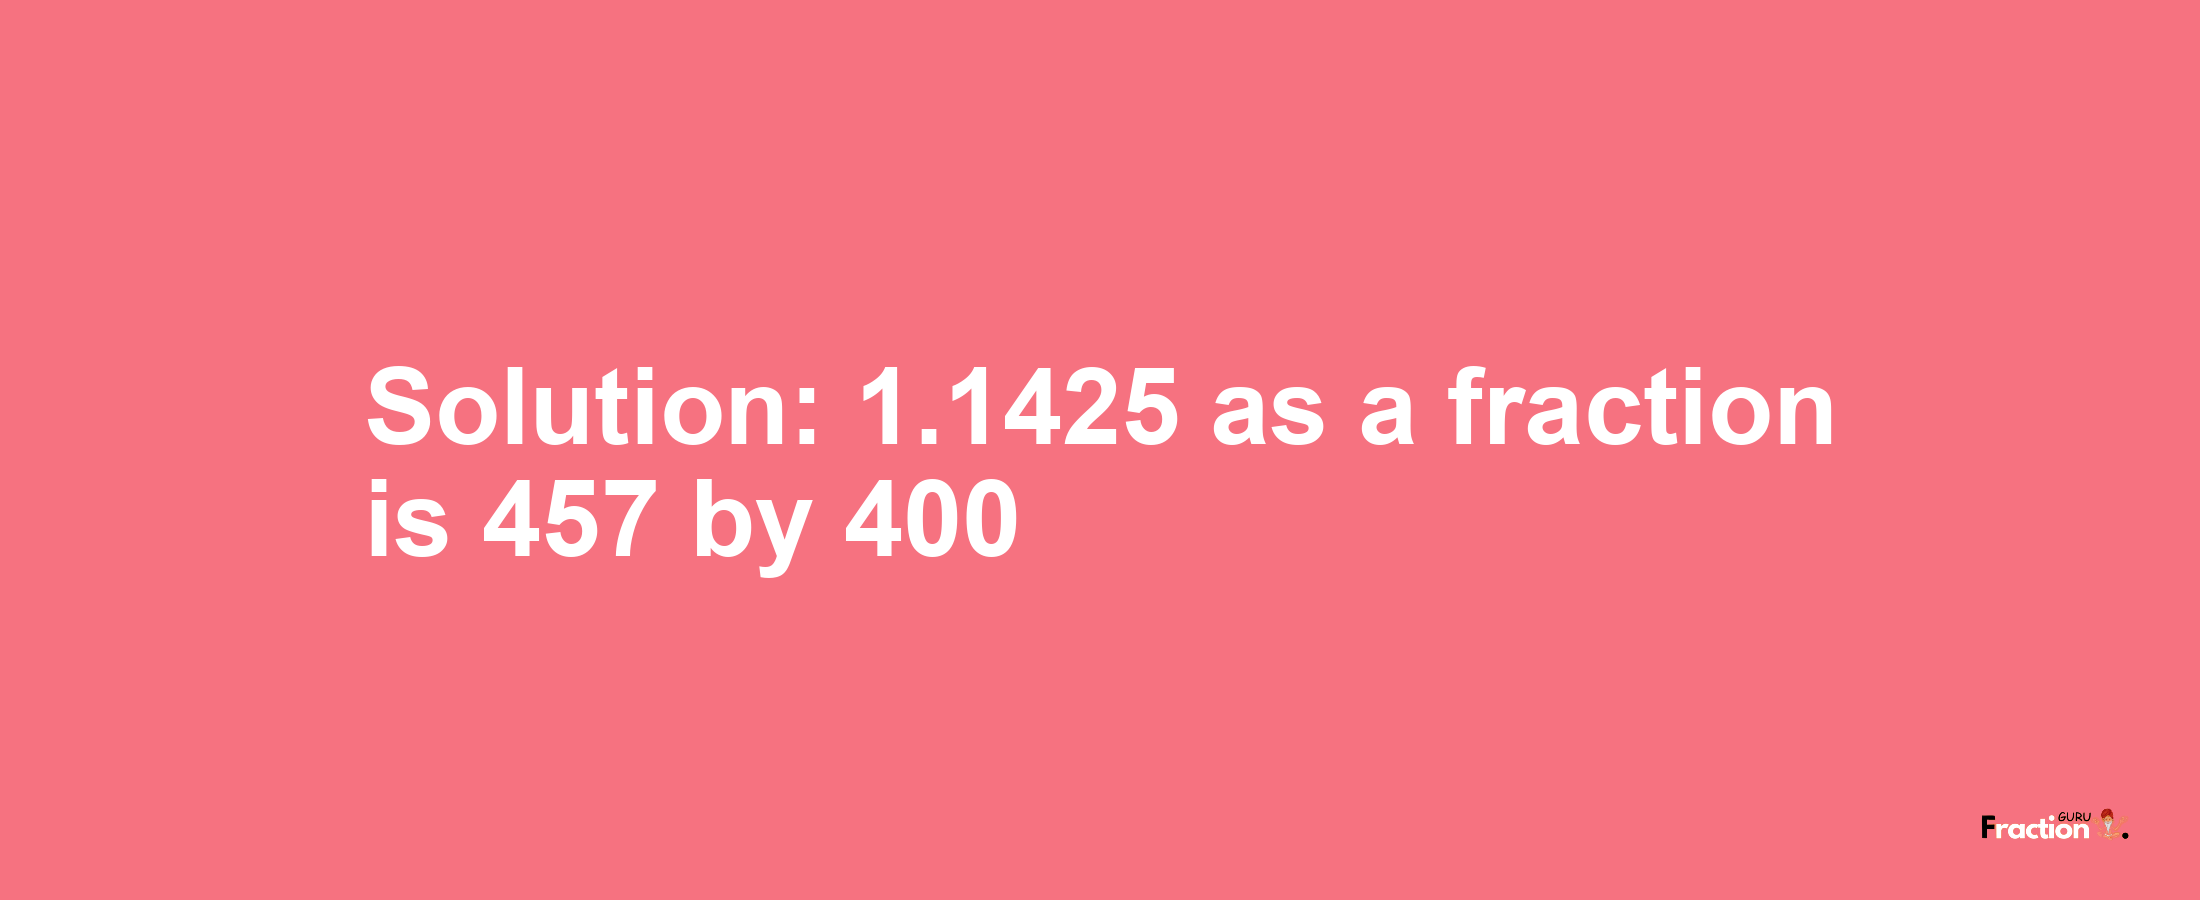 Solution:1.1425 as a fraction is 457/400